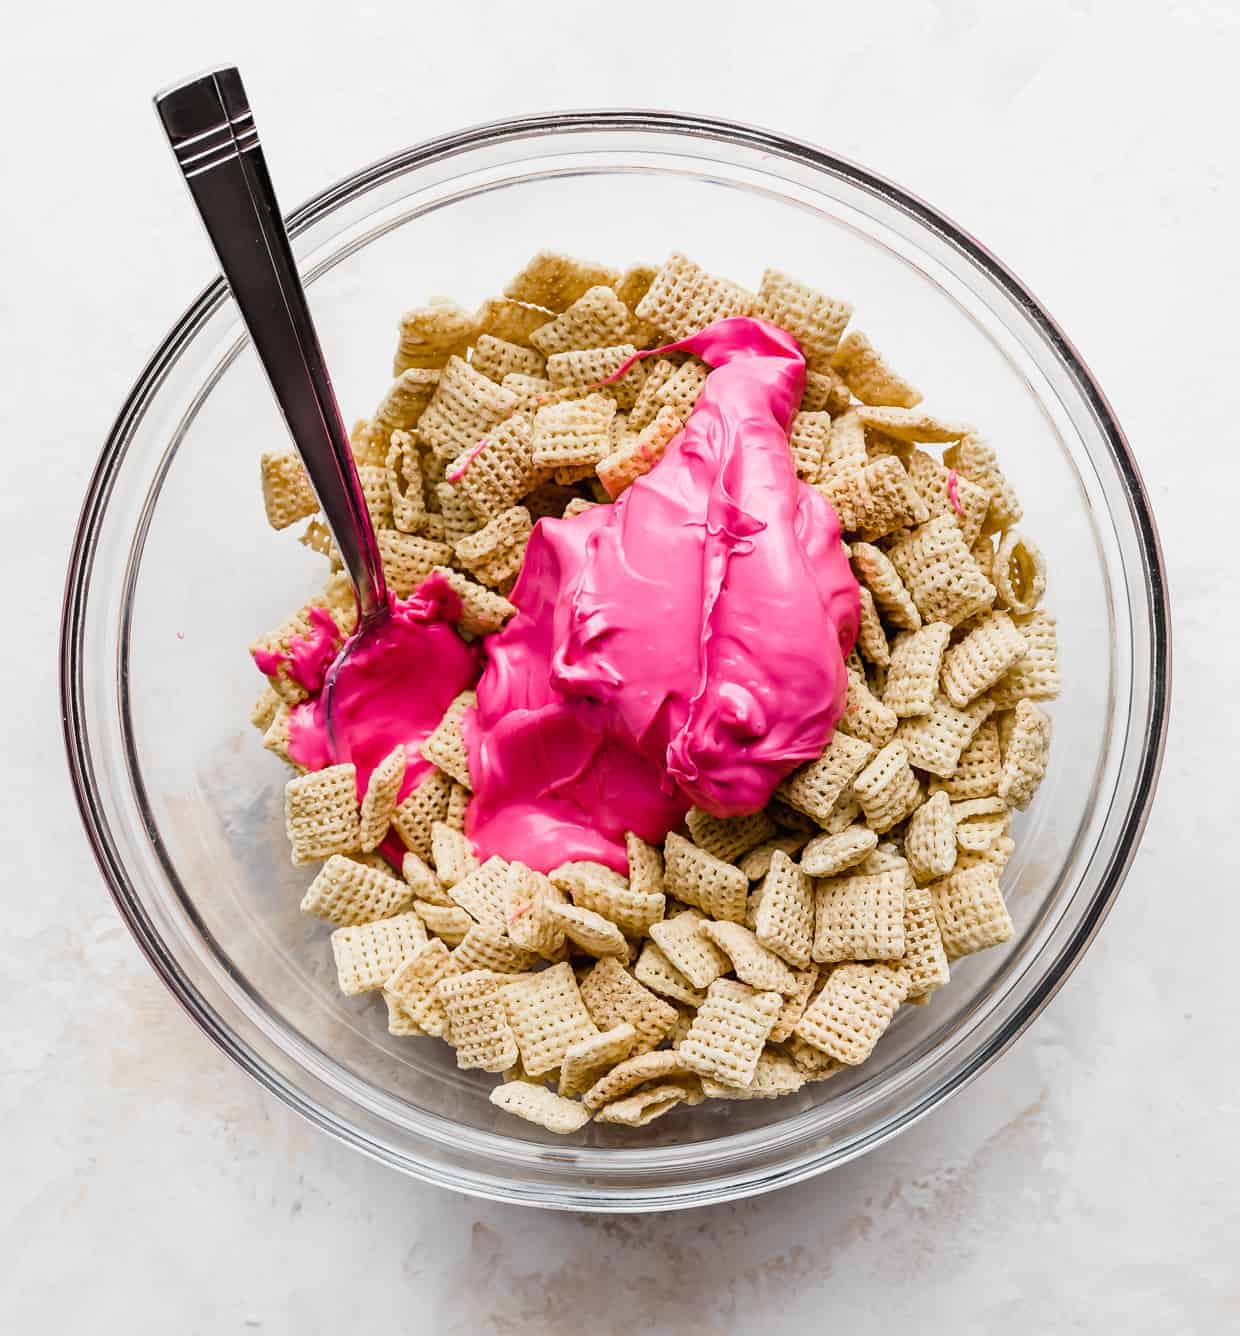 A glass bowl with Chex cereal and pink melted chocolate drizzled overtop.